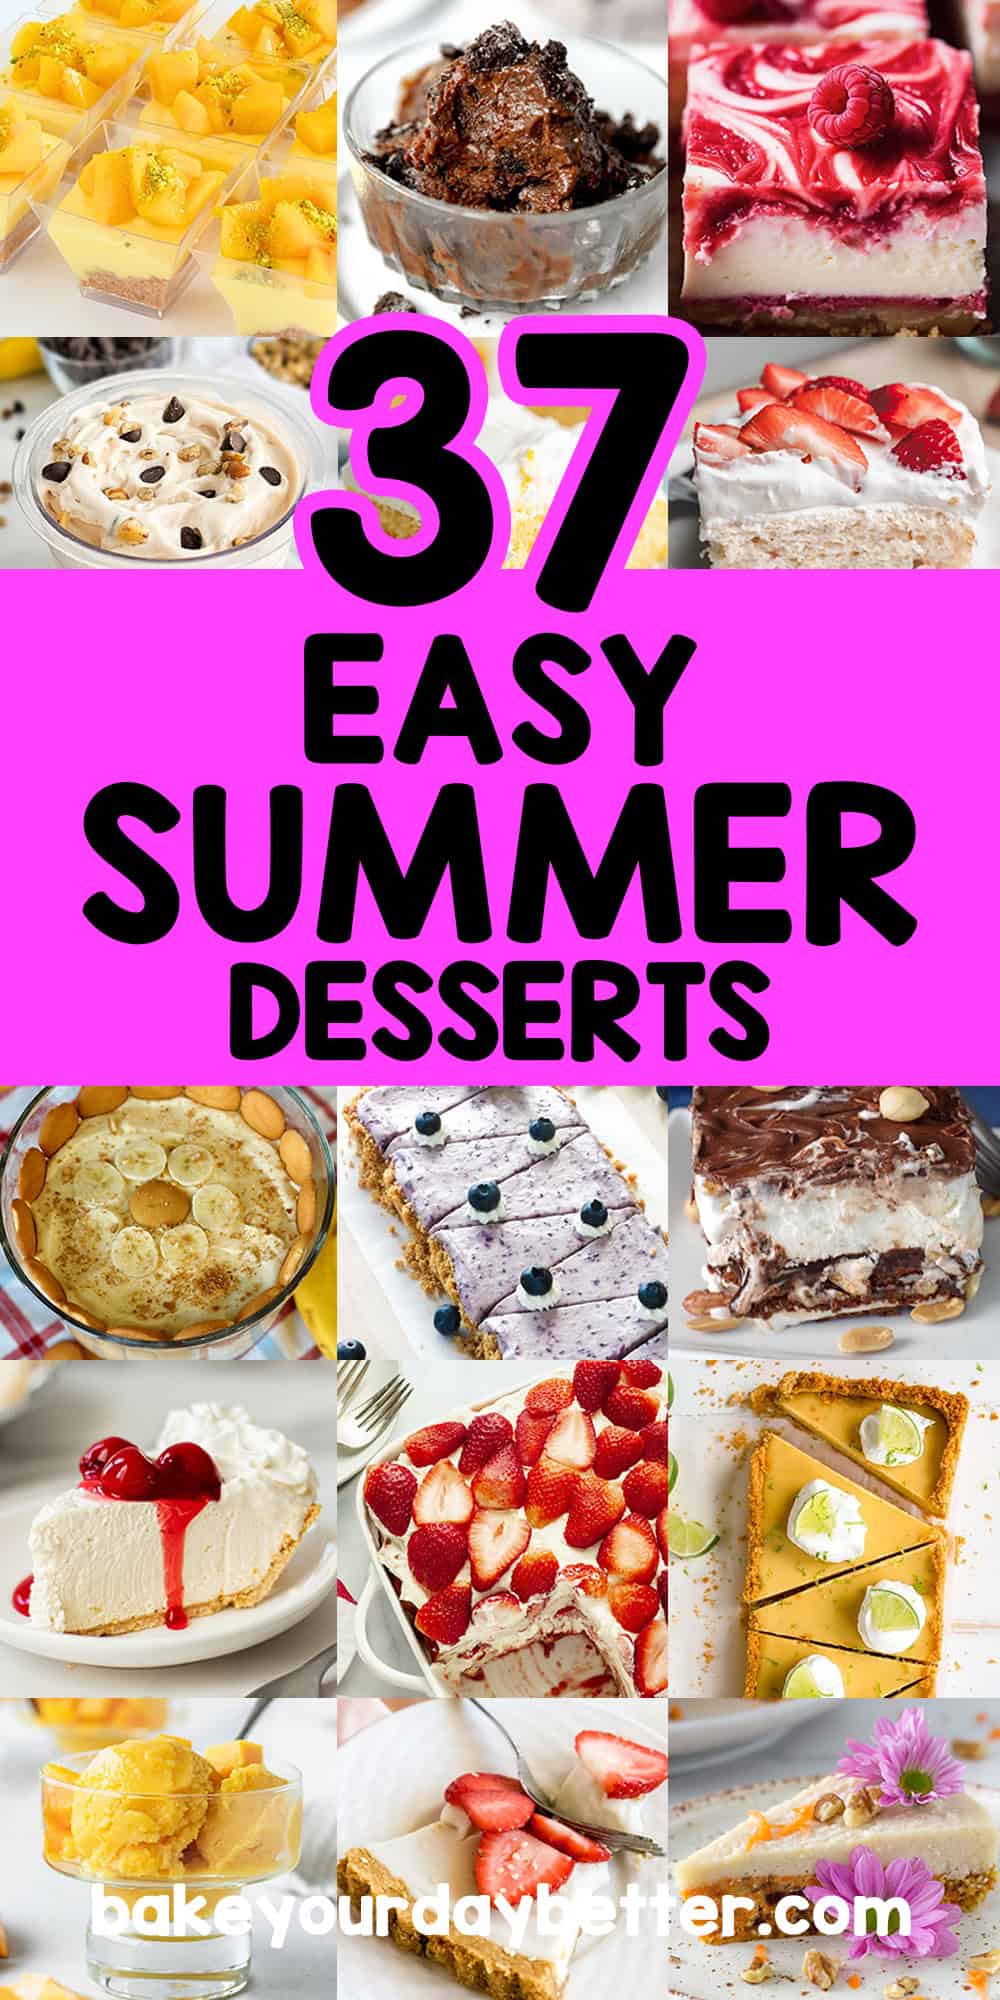 pictures of summer desserts with text overlay that says: 37 easy summer desserts